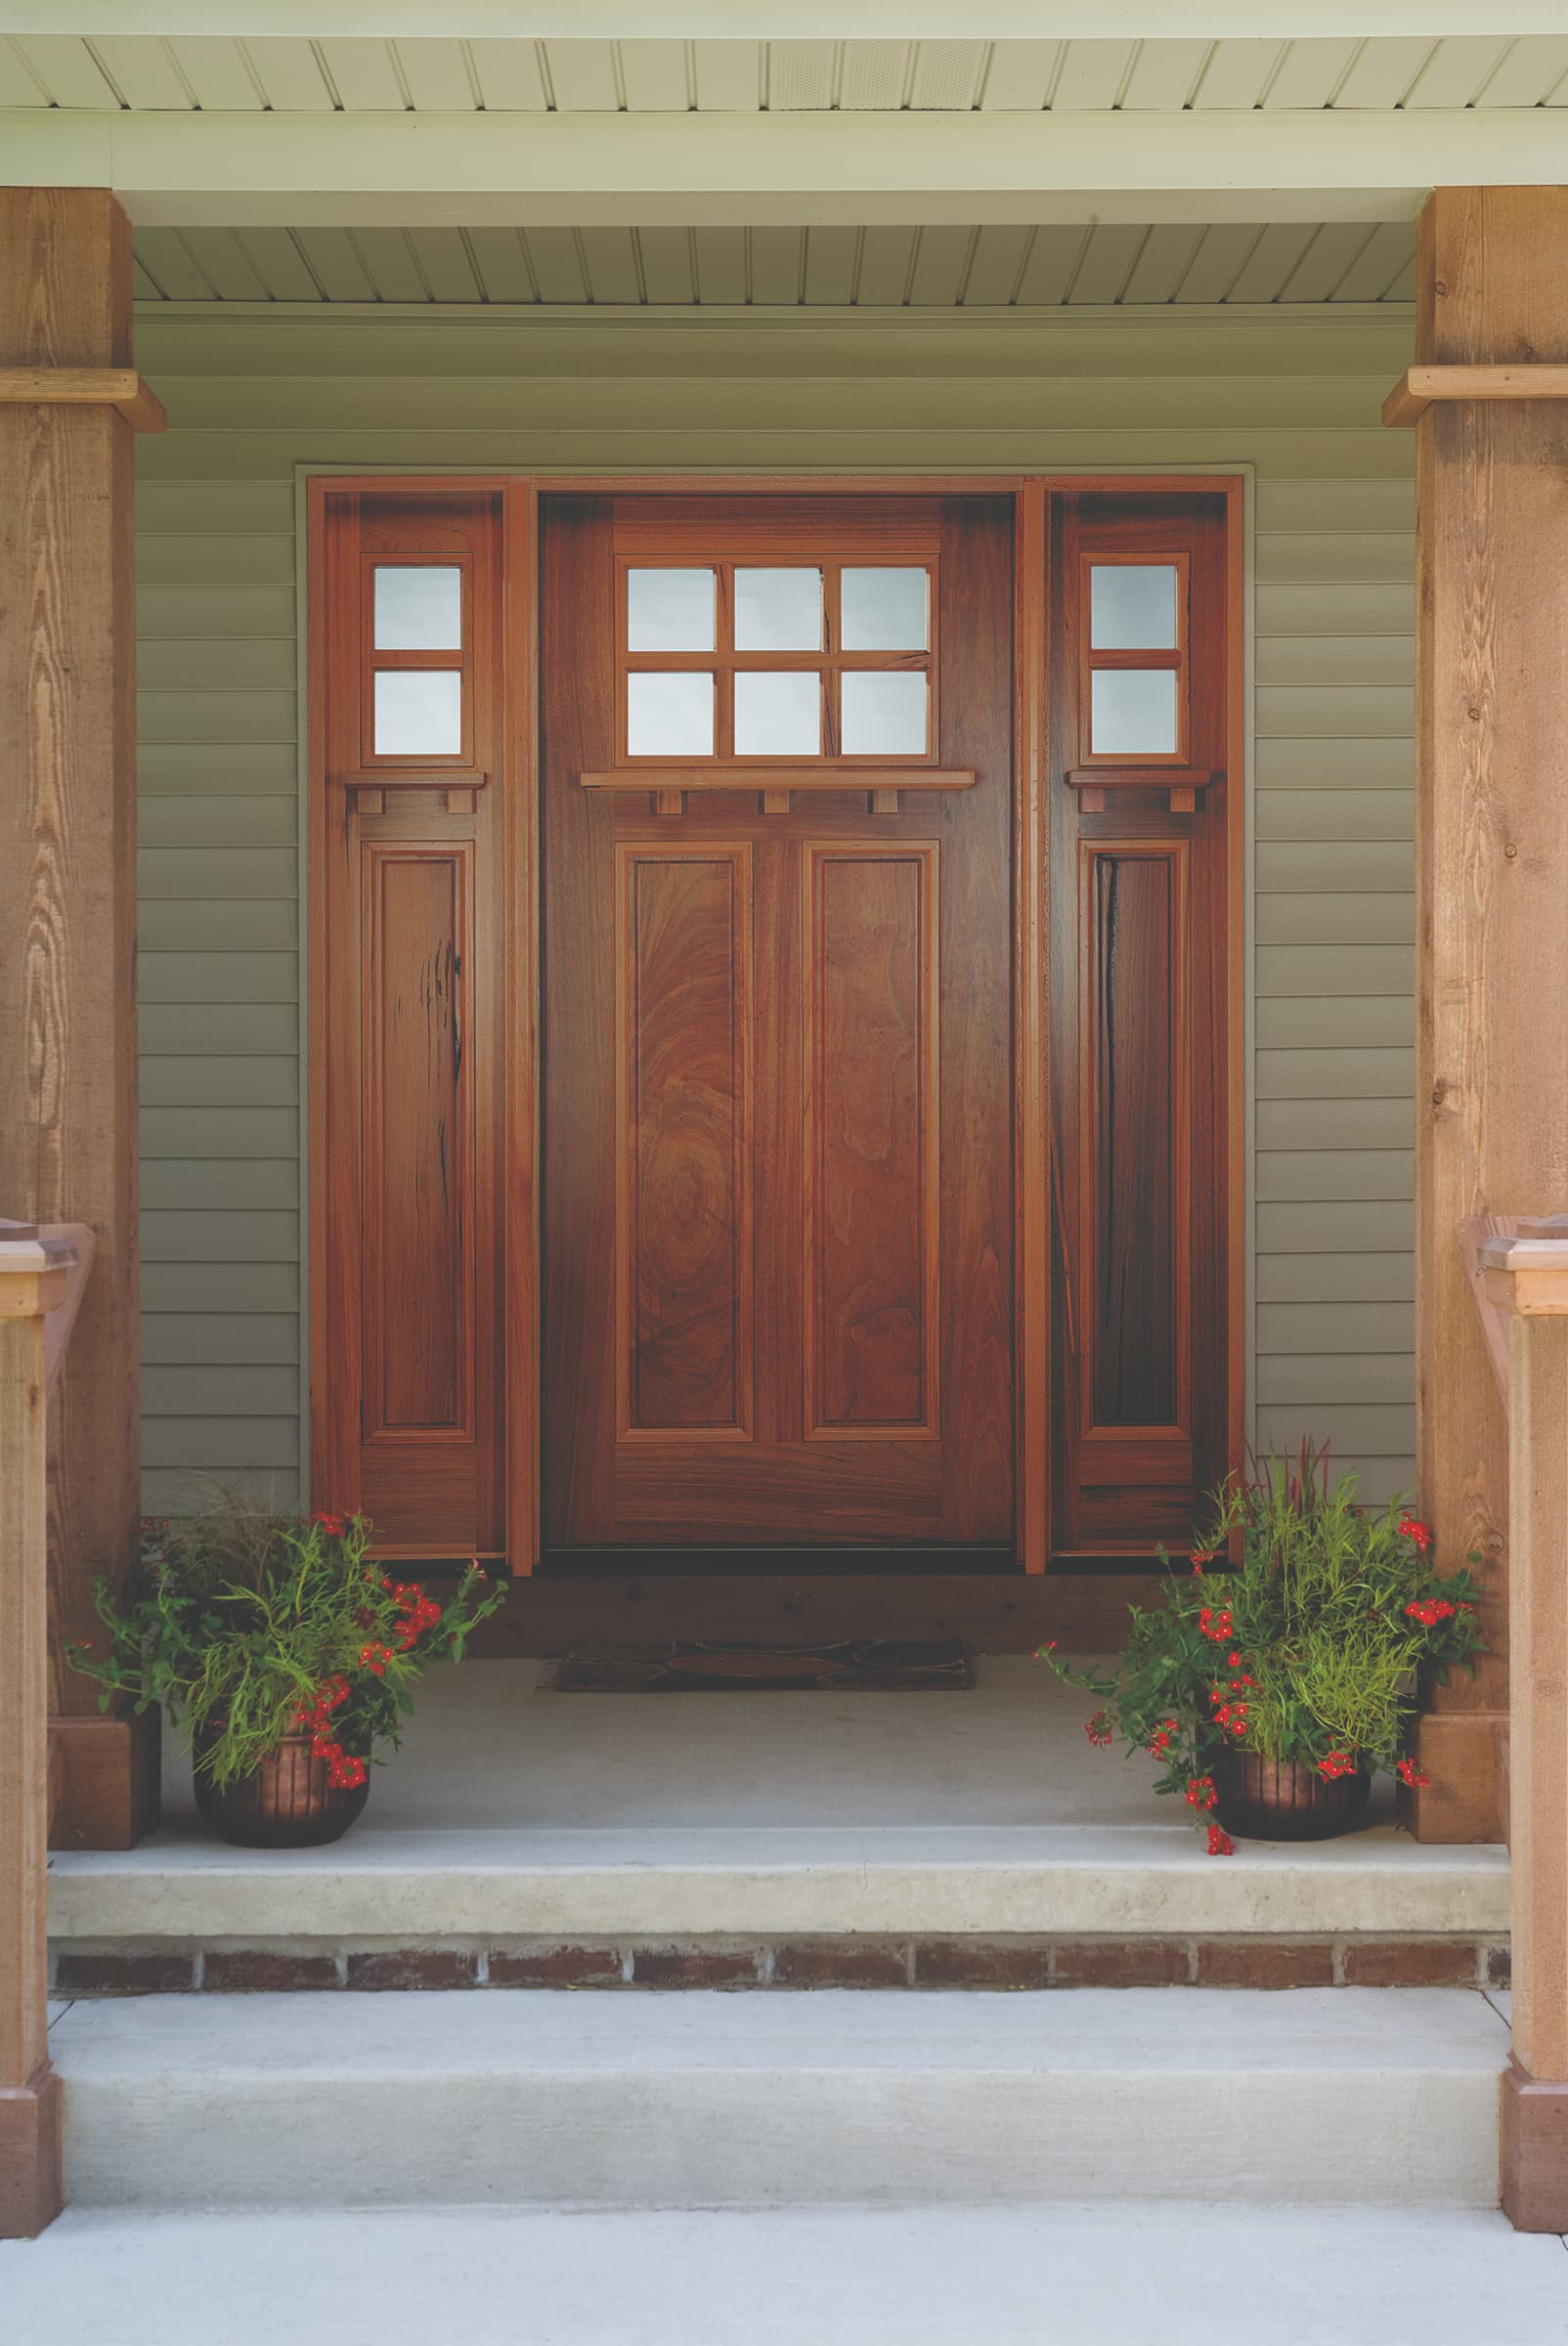 Craftsman style front door made of real wood set in inviting porch